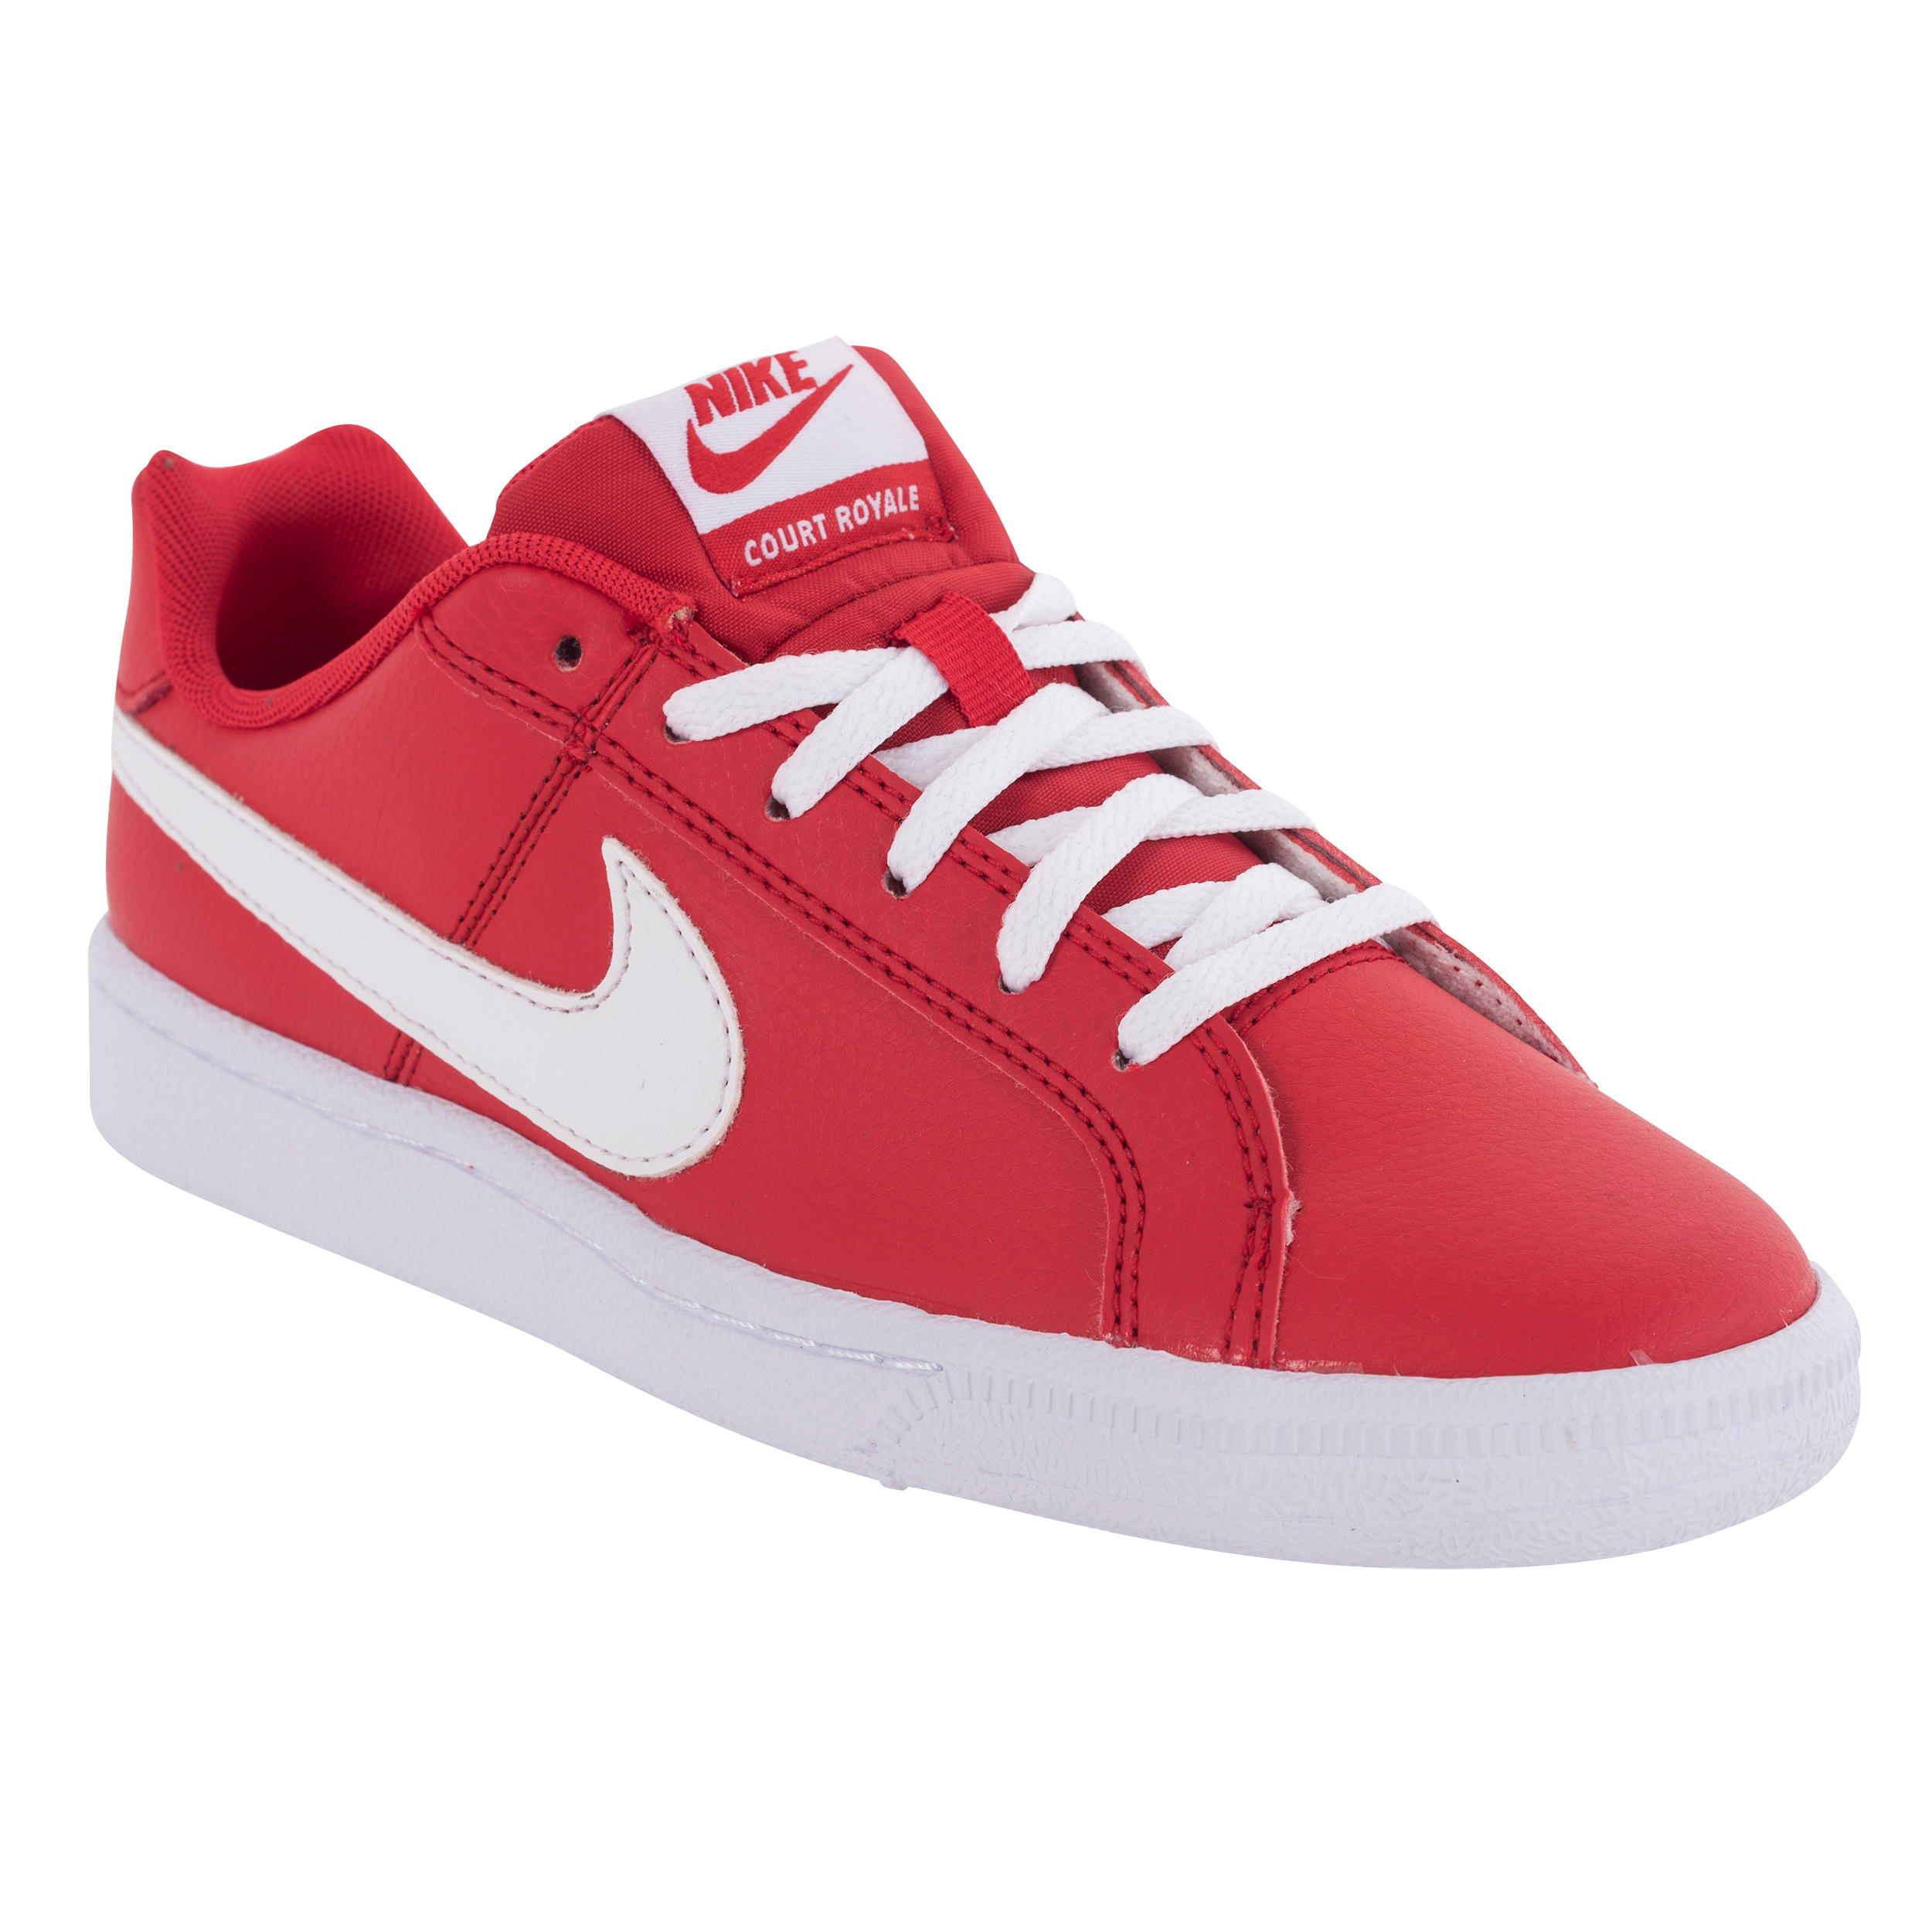 Court Royale Junior Tennis Shoes - Red 1/9